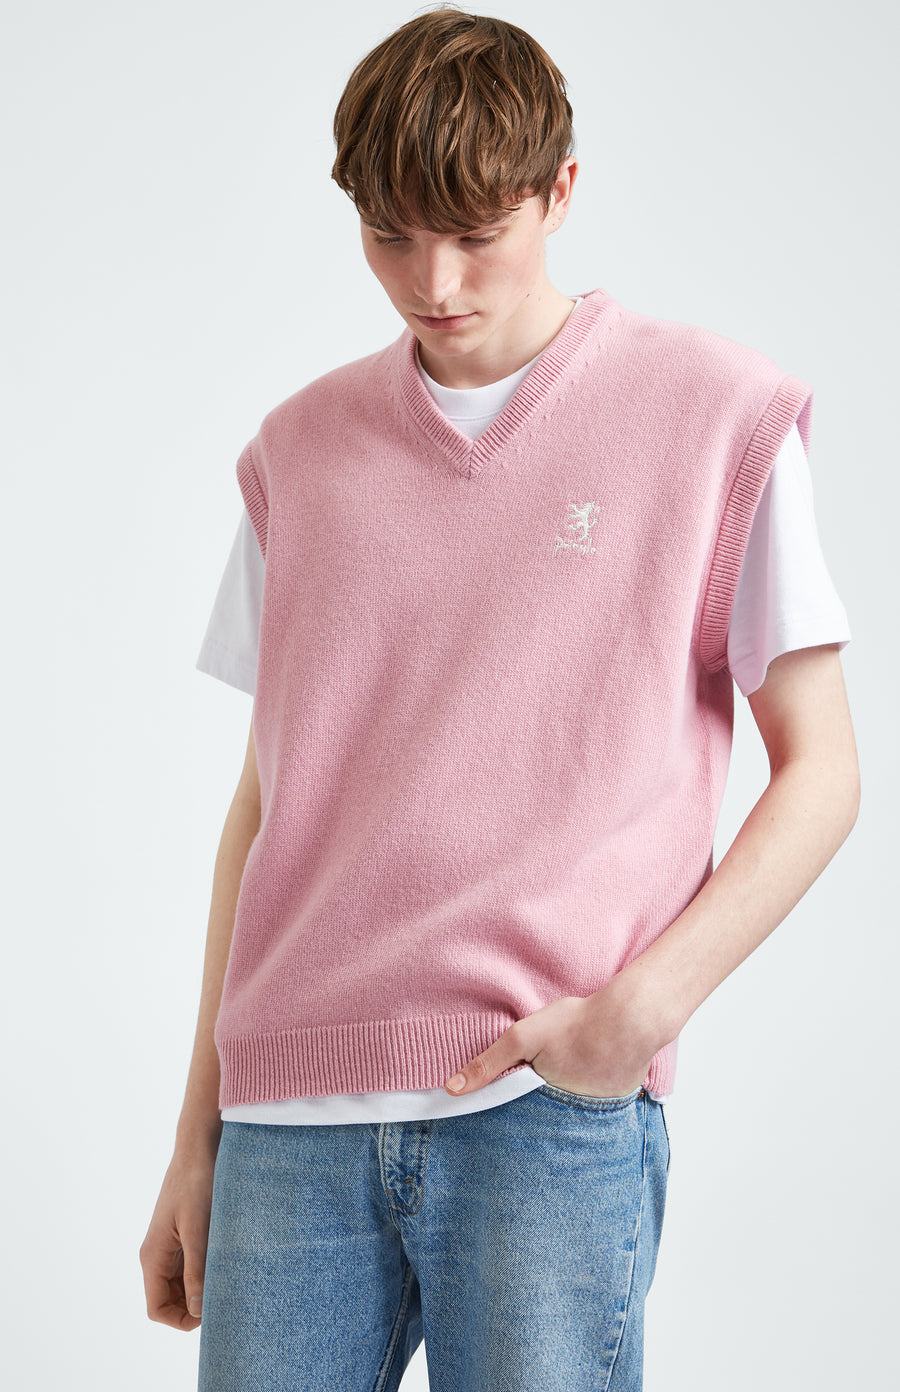 V Neck Sleeveless Jumper In Pink With Contrasting Lion Logo